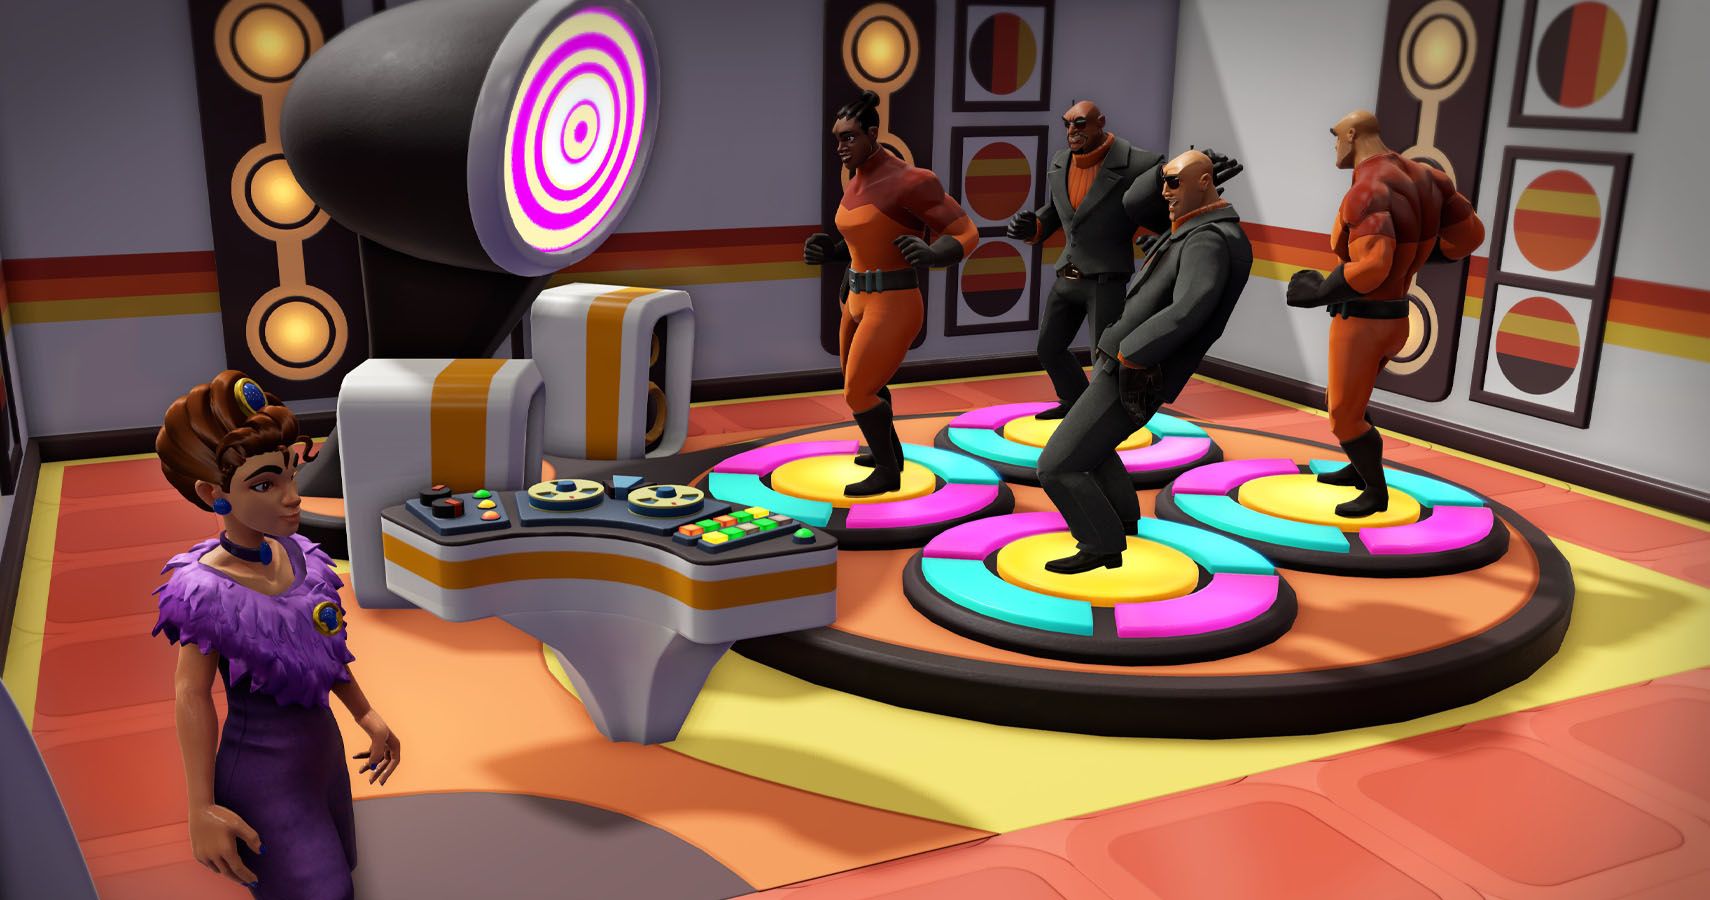 Dance battle style image with henchmen.